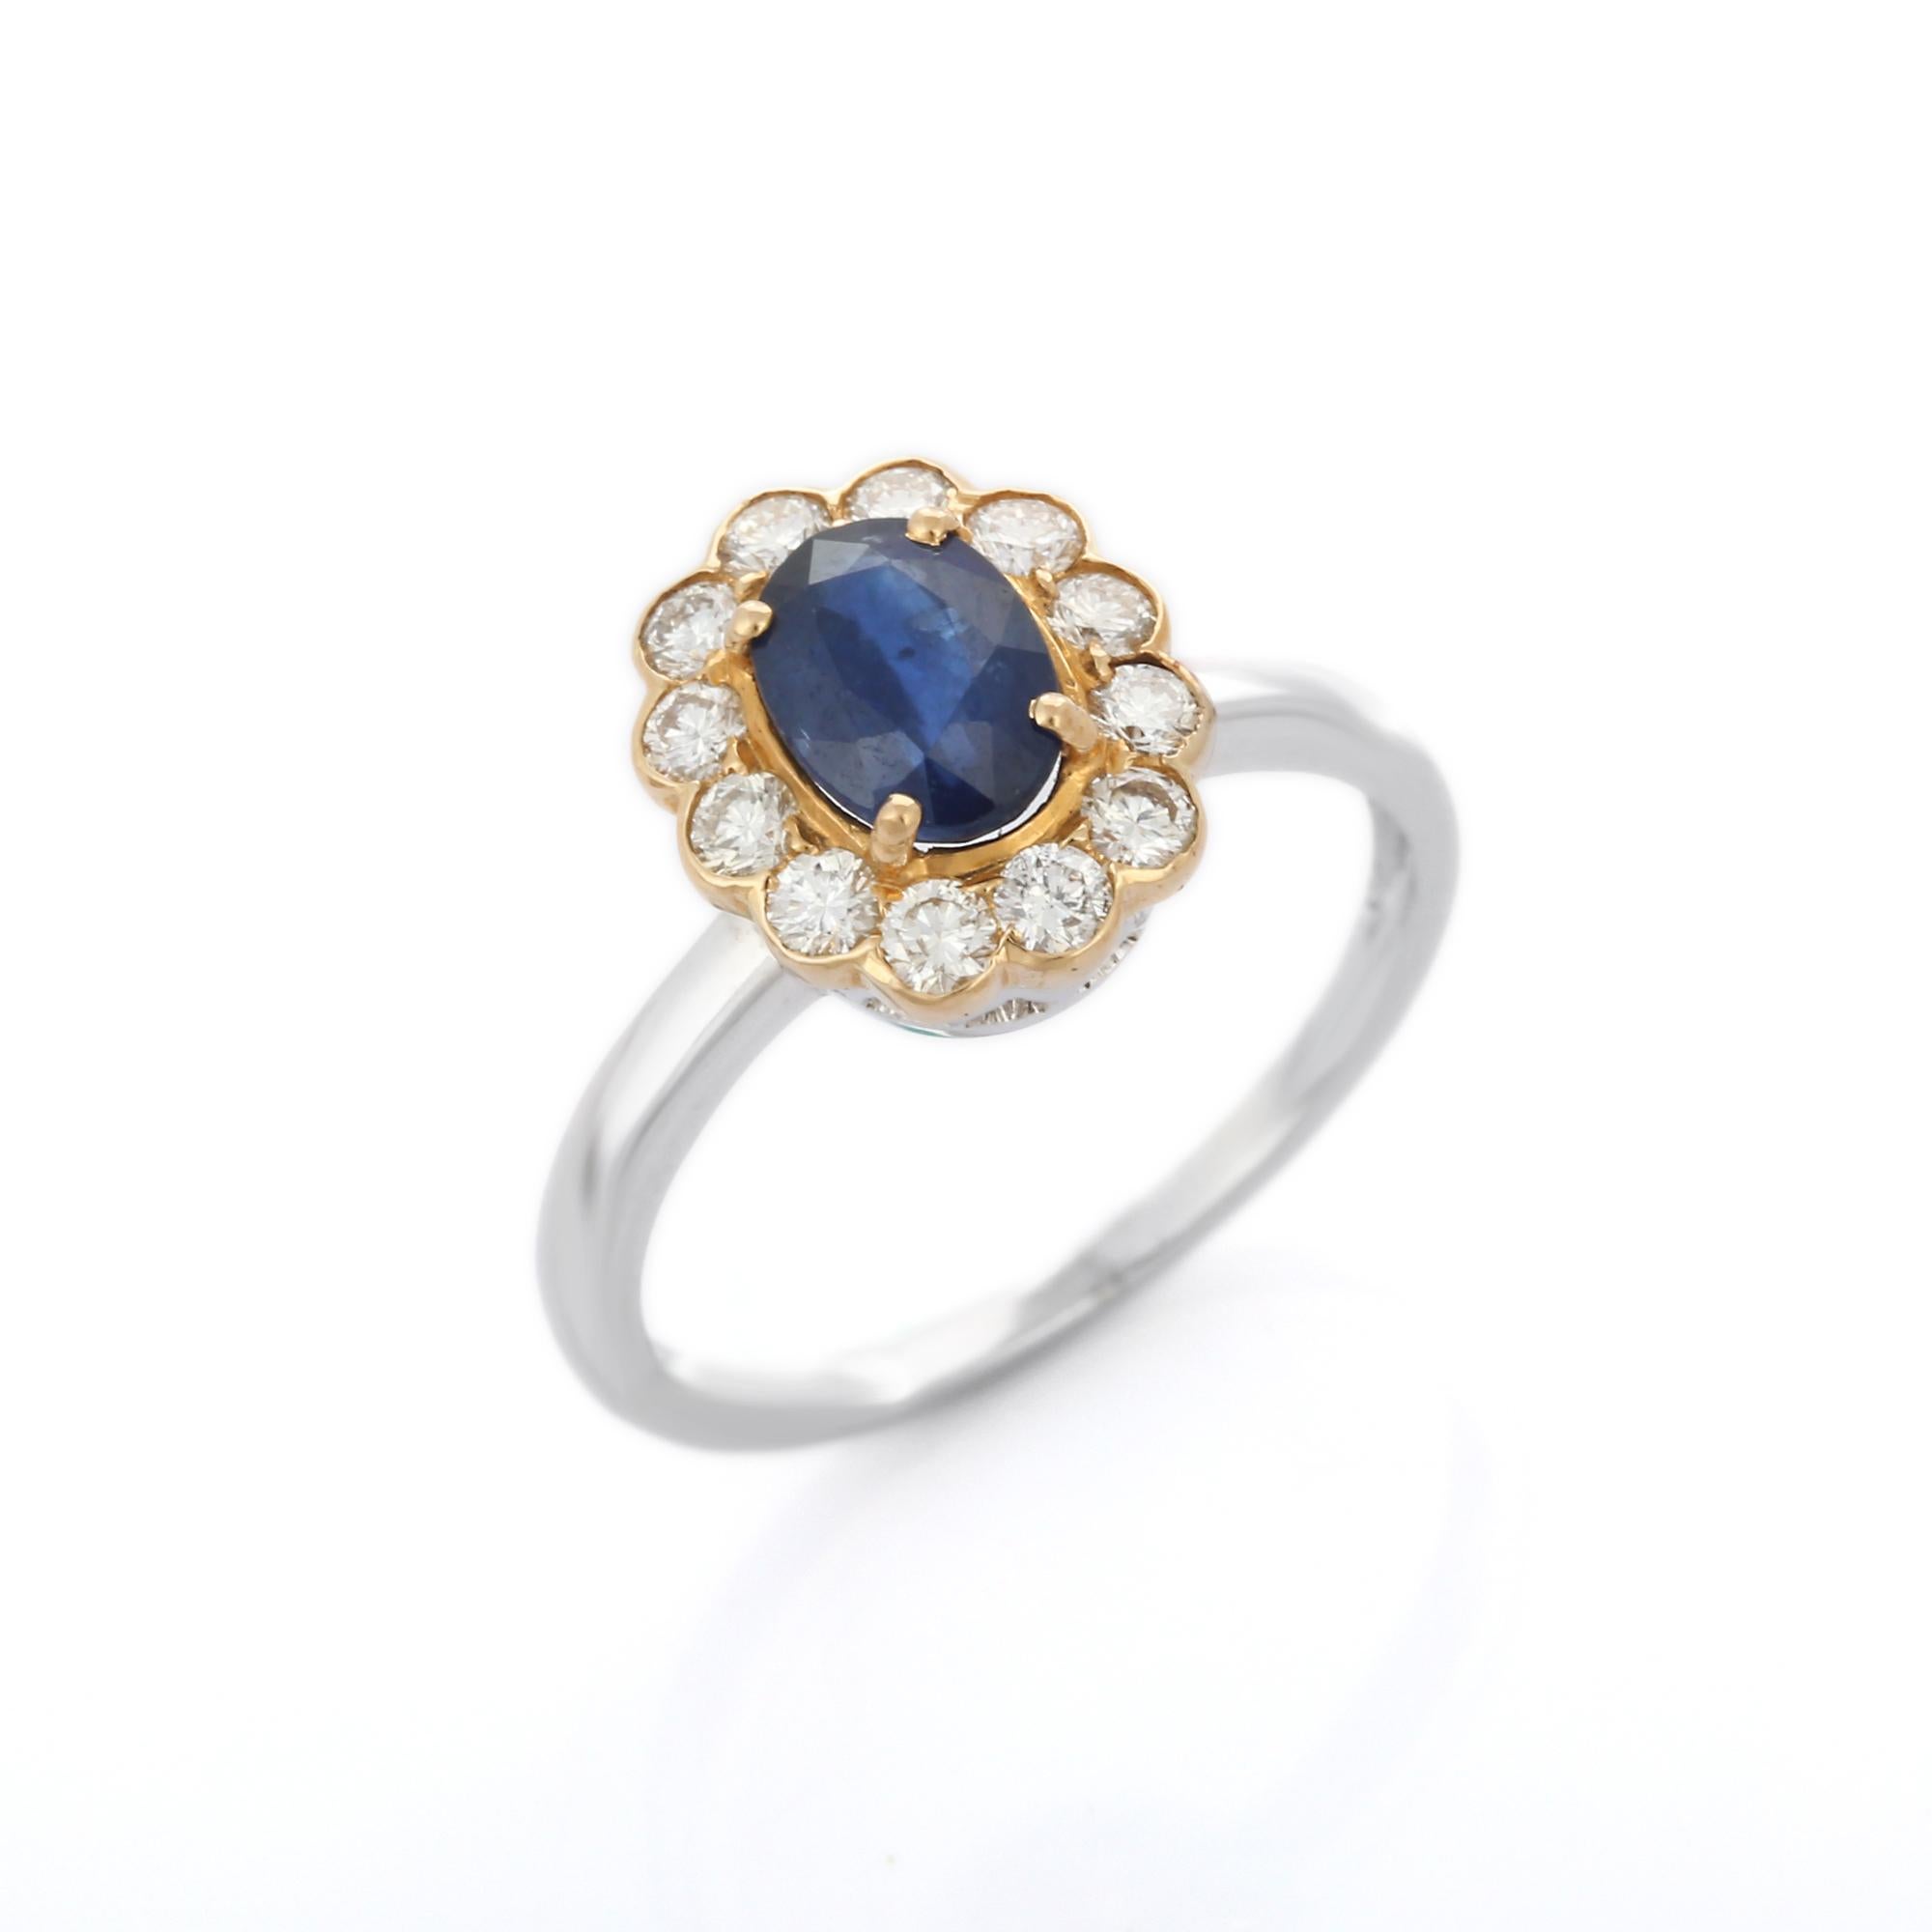 For Sale:  1.20 Ct Blue Sapphire Halo Engagement Ring in 18K White Gold 5